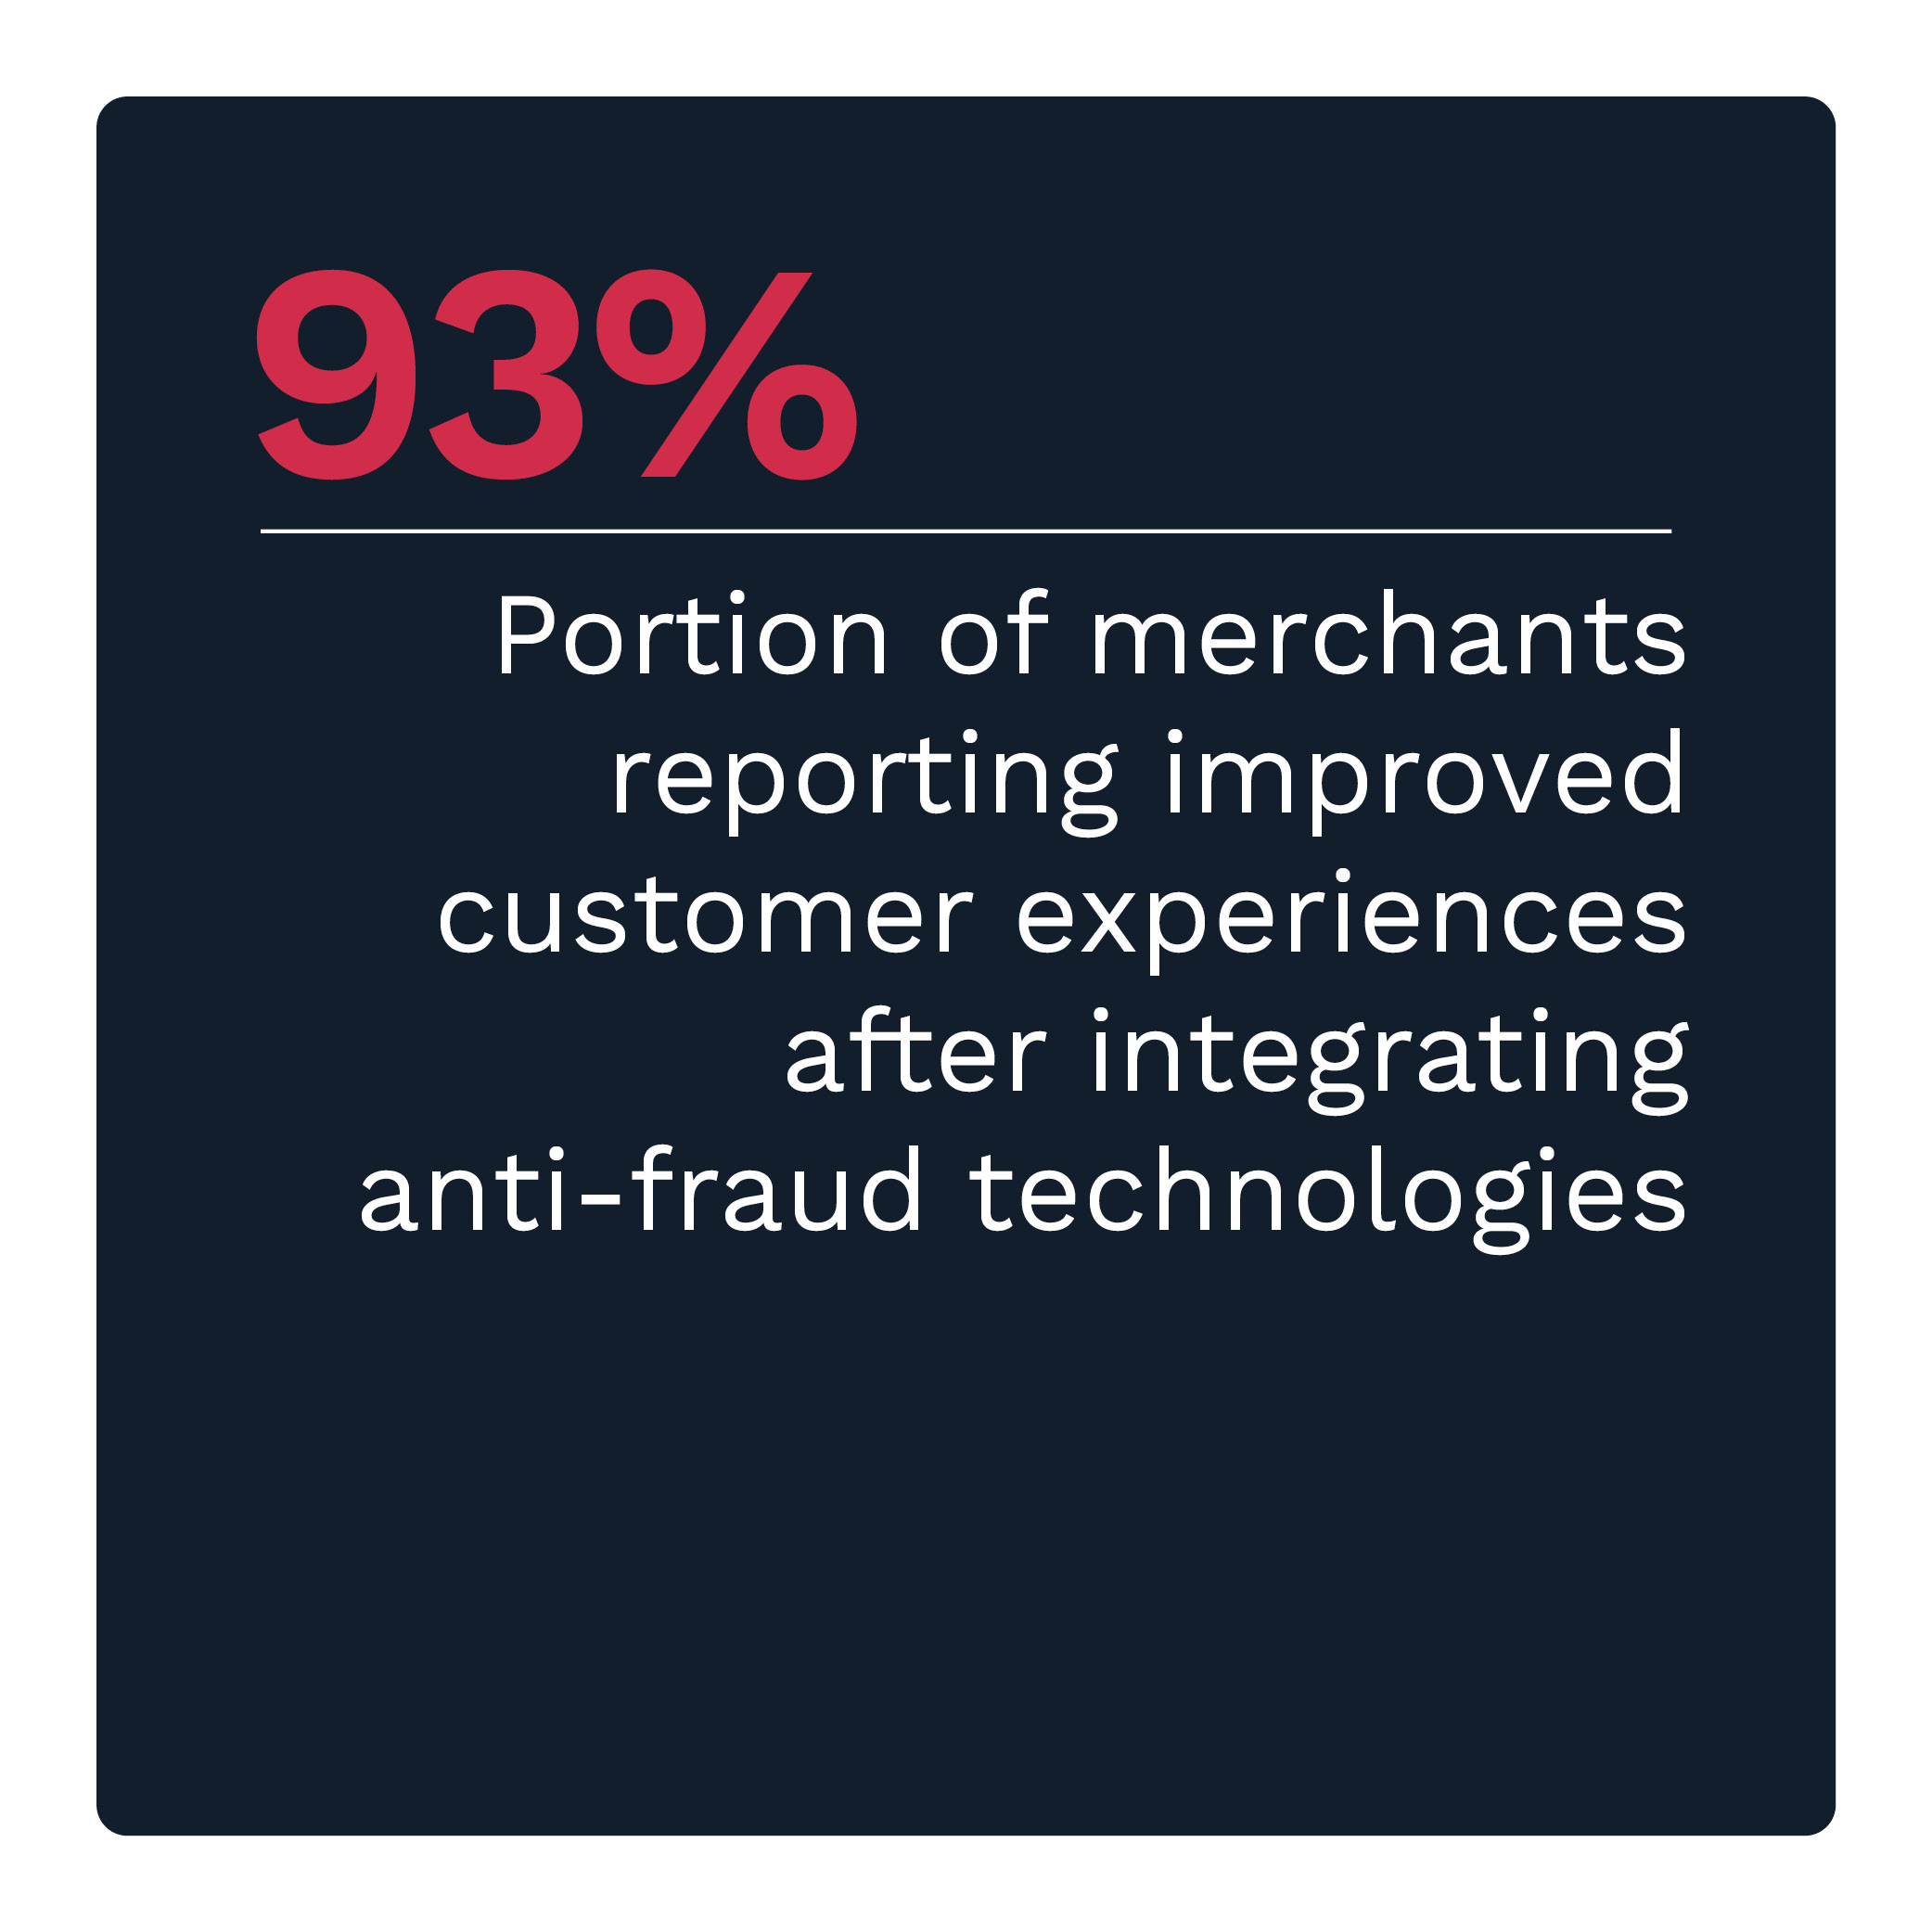 93%: Portion of merchants reporting improved customer experiences after integrating anti-fraud technologies